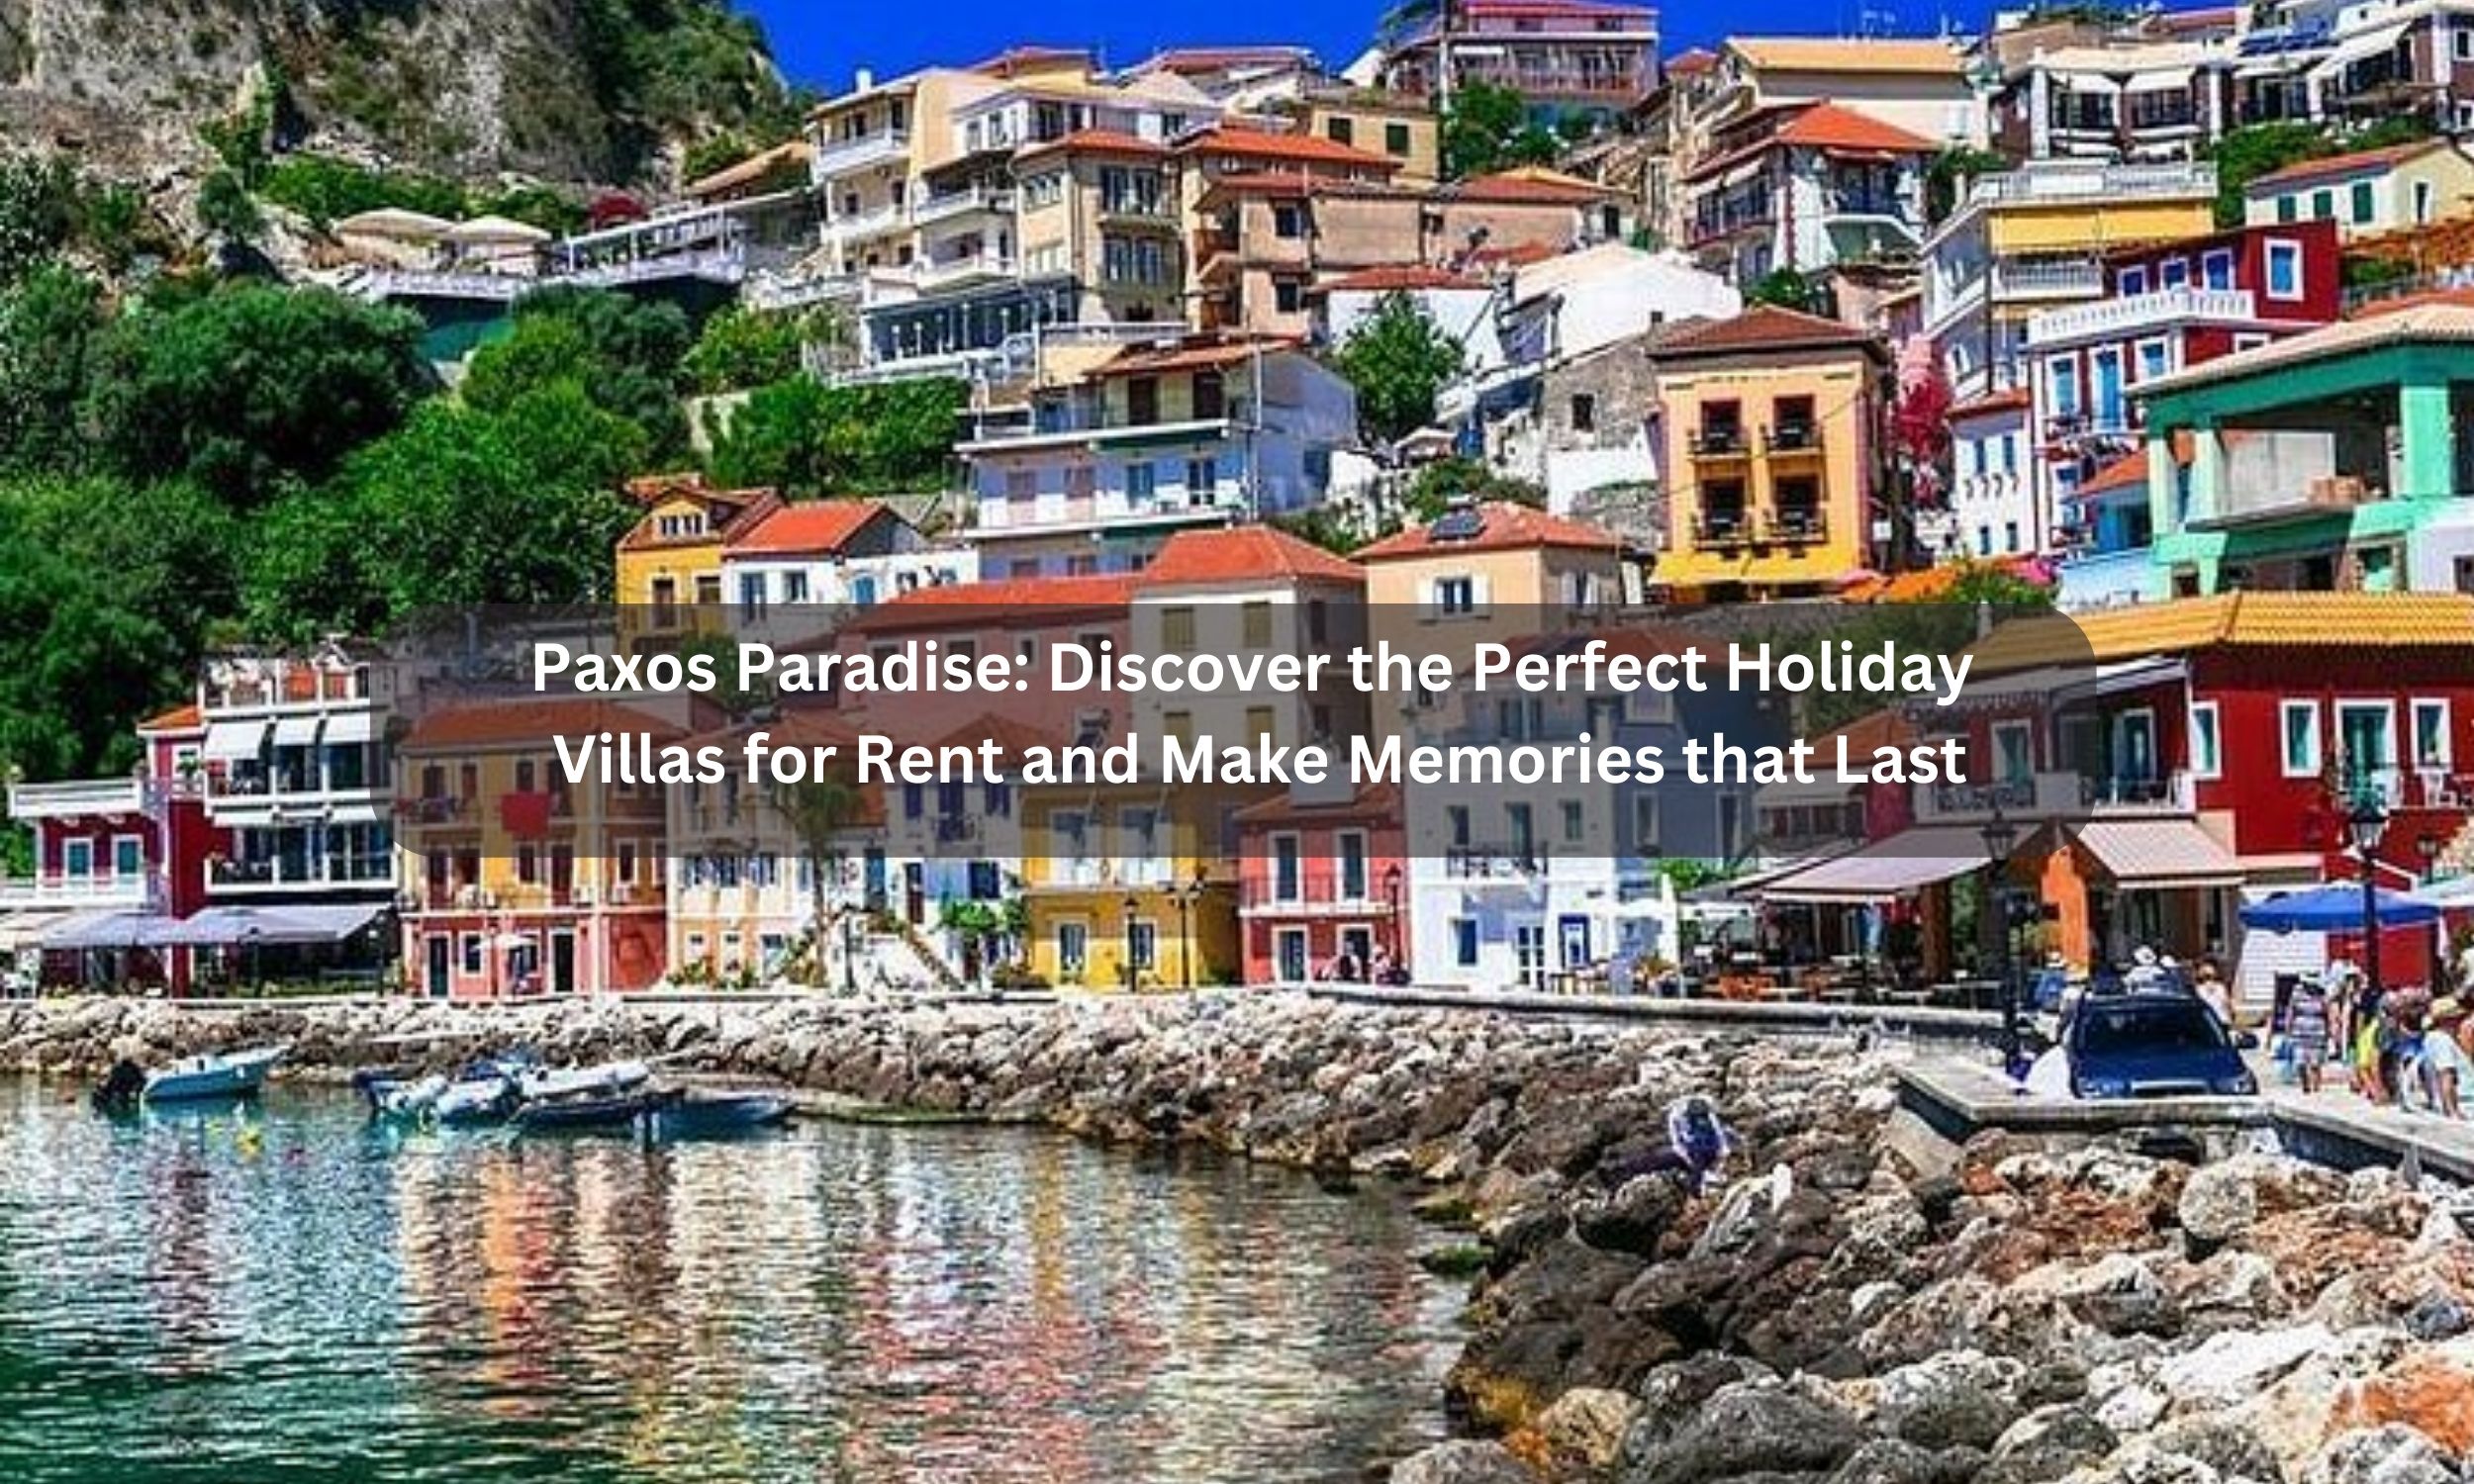 Paxos Paradise: Discover the Perfect Holiday Villas for Rent and Make Memories that Last